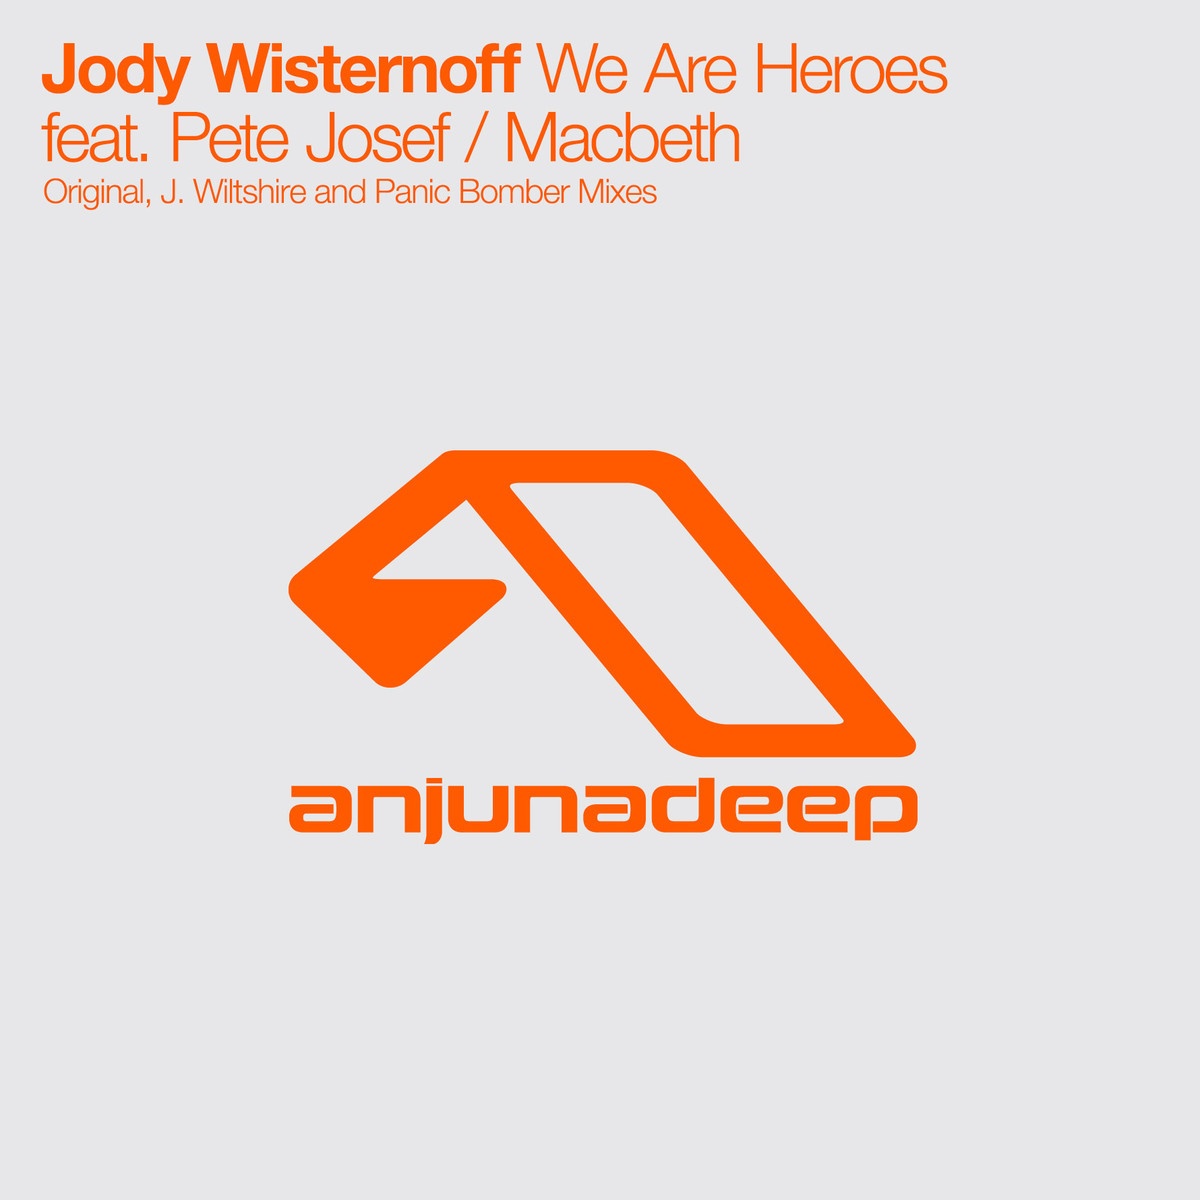 We Are Heroes Feat. Pete Josef (J. Wiltshire Remix)